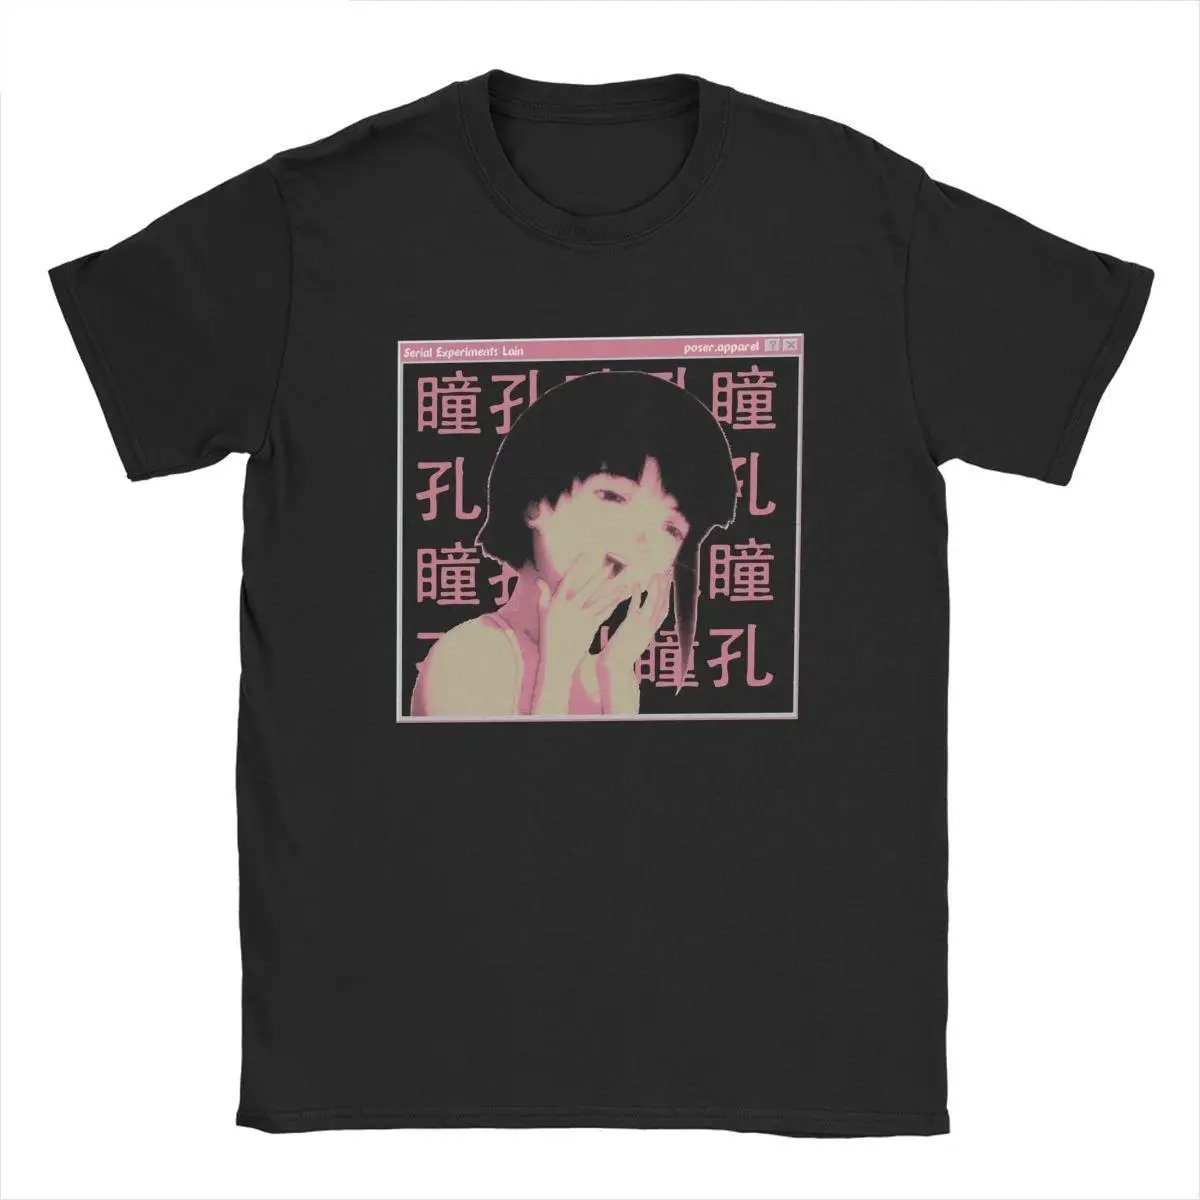 Men's T-Shirts Serial Experiments Lain Casual Pure Cotton Tees Short Sleeve Sad Japanese Anime T Shirts Crew Neck Tops Unique